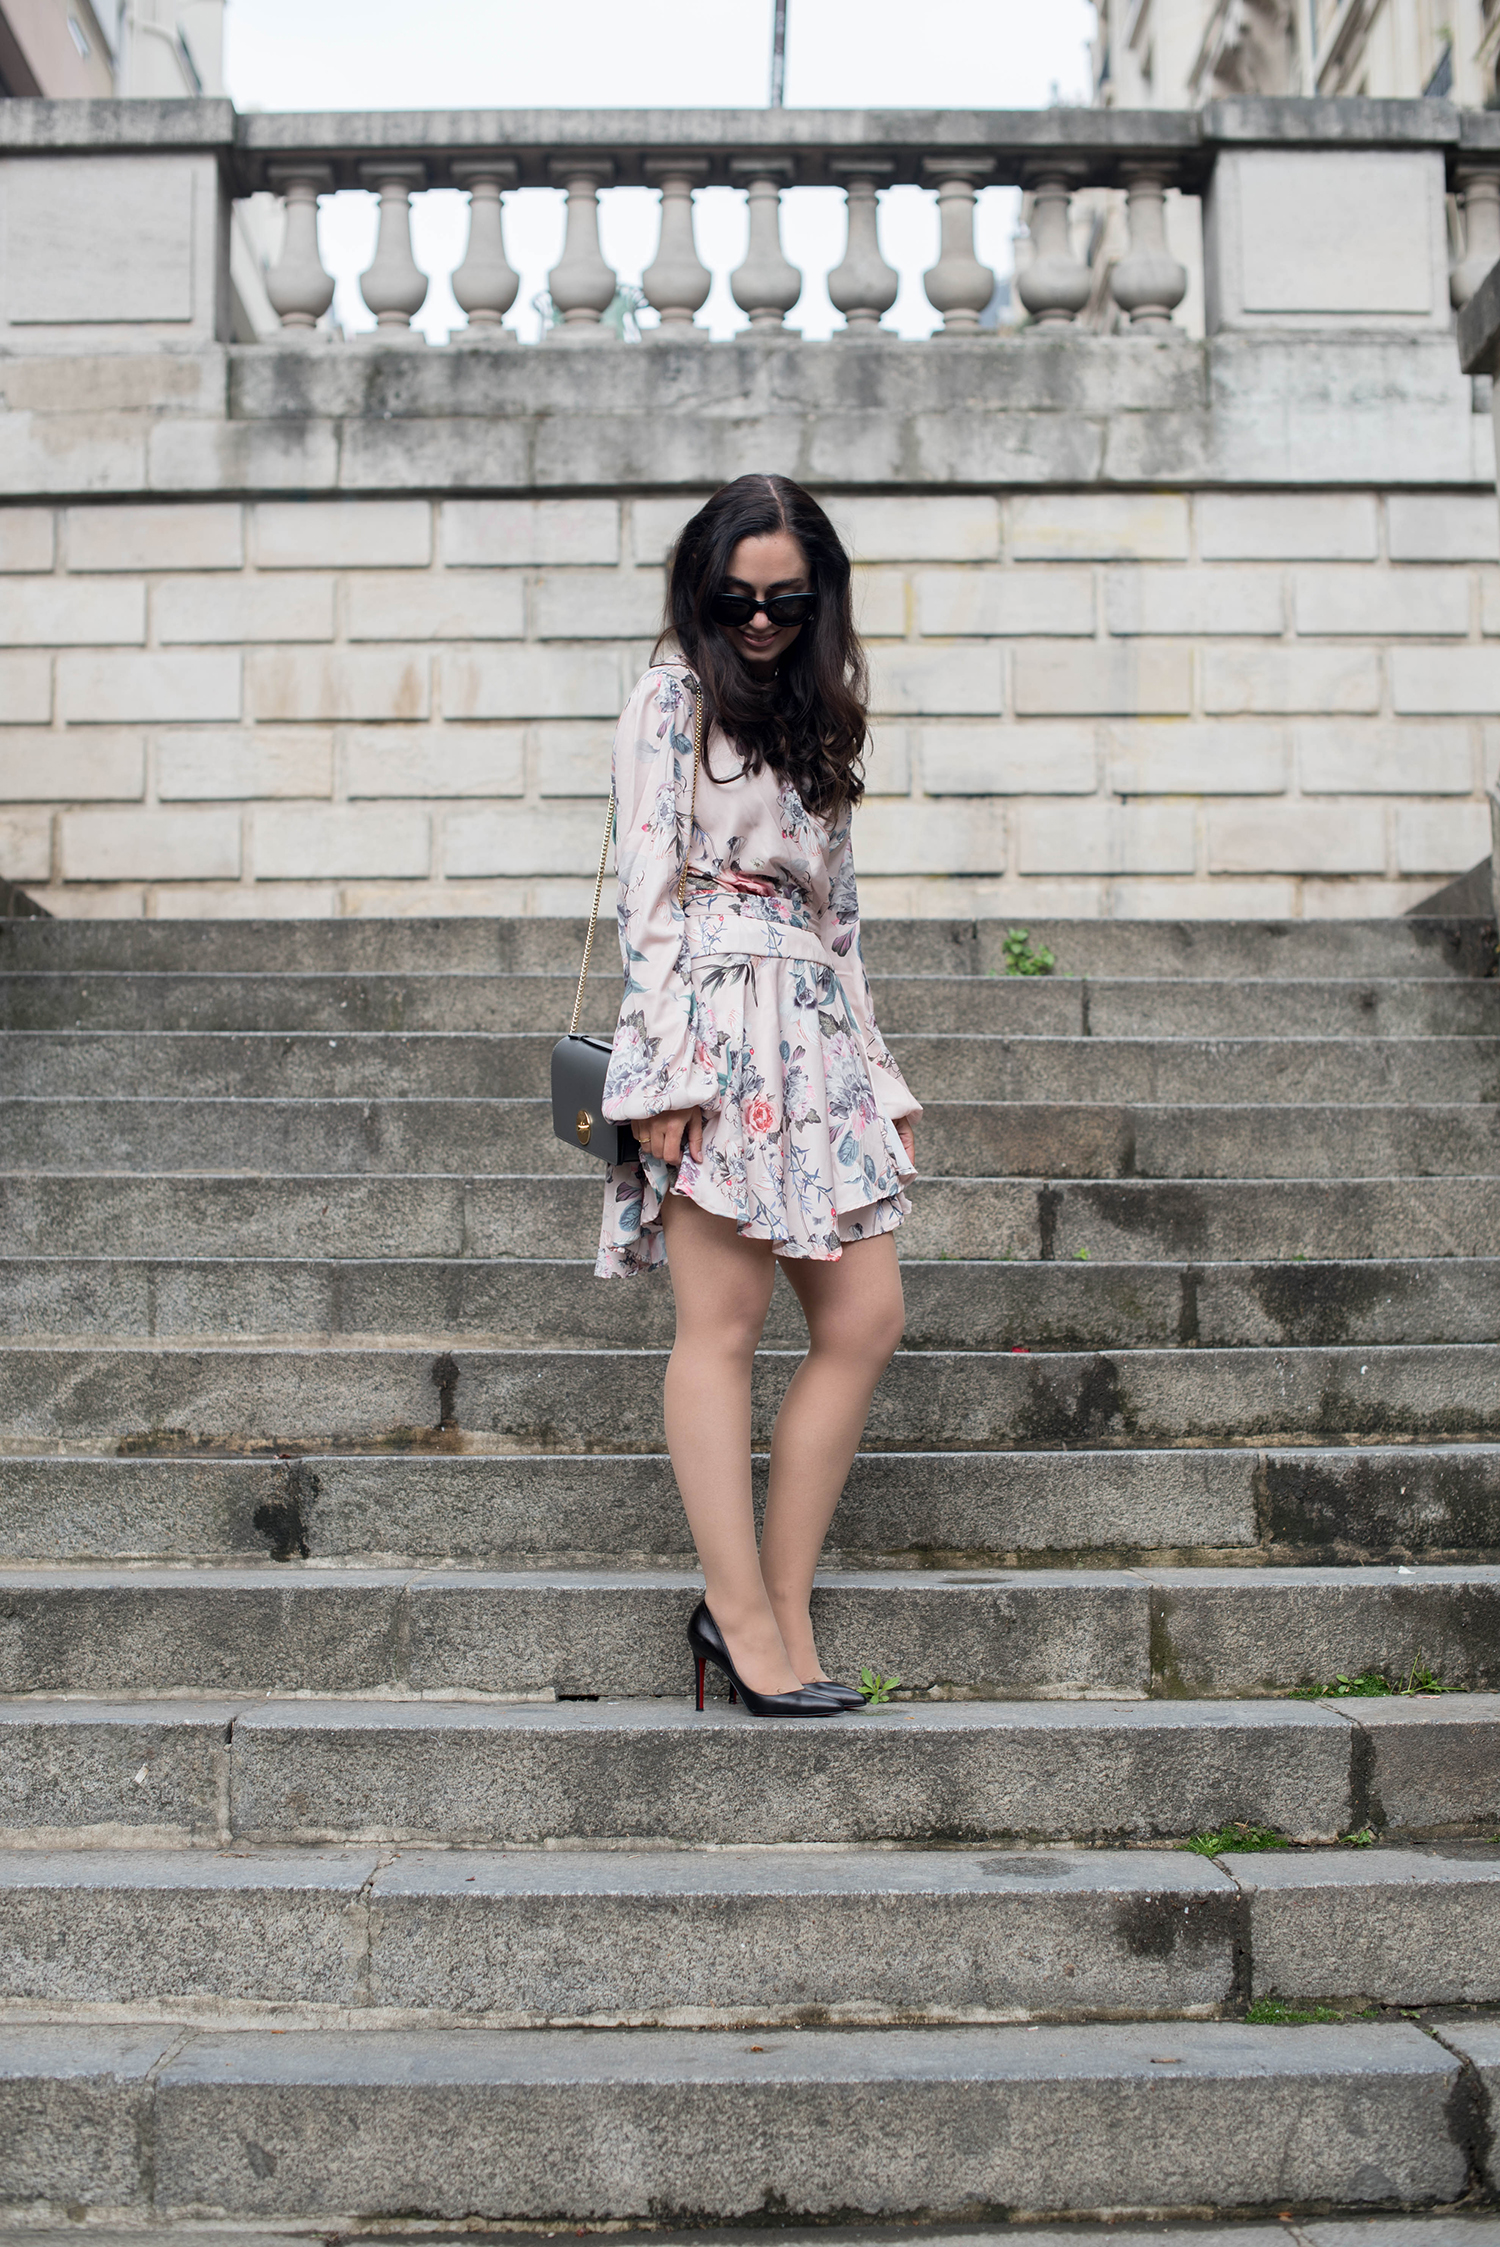 Photo of personal style blogger Cee Fardoe of Coco & Vera wearing a Majorelle floral dress in Paris